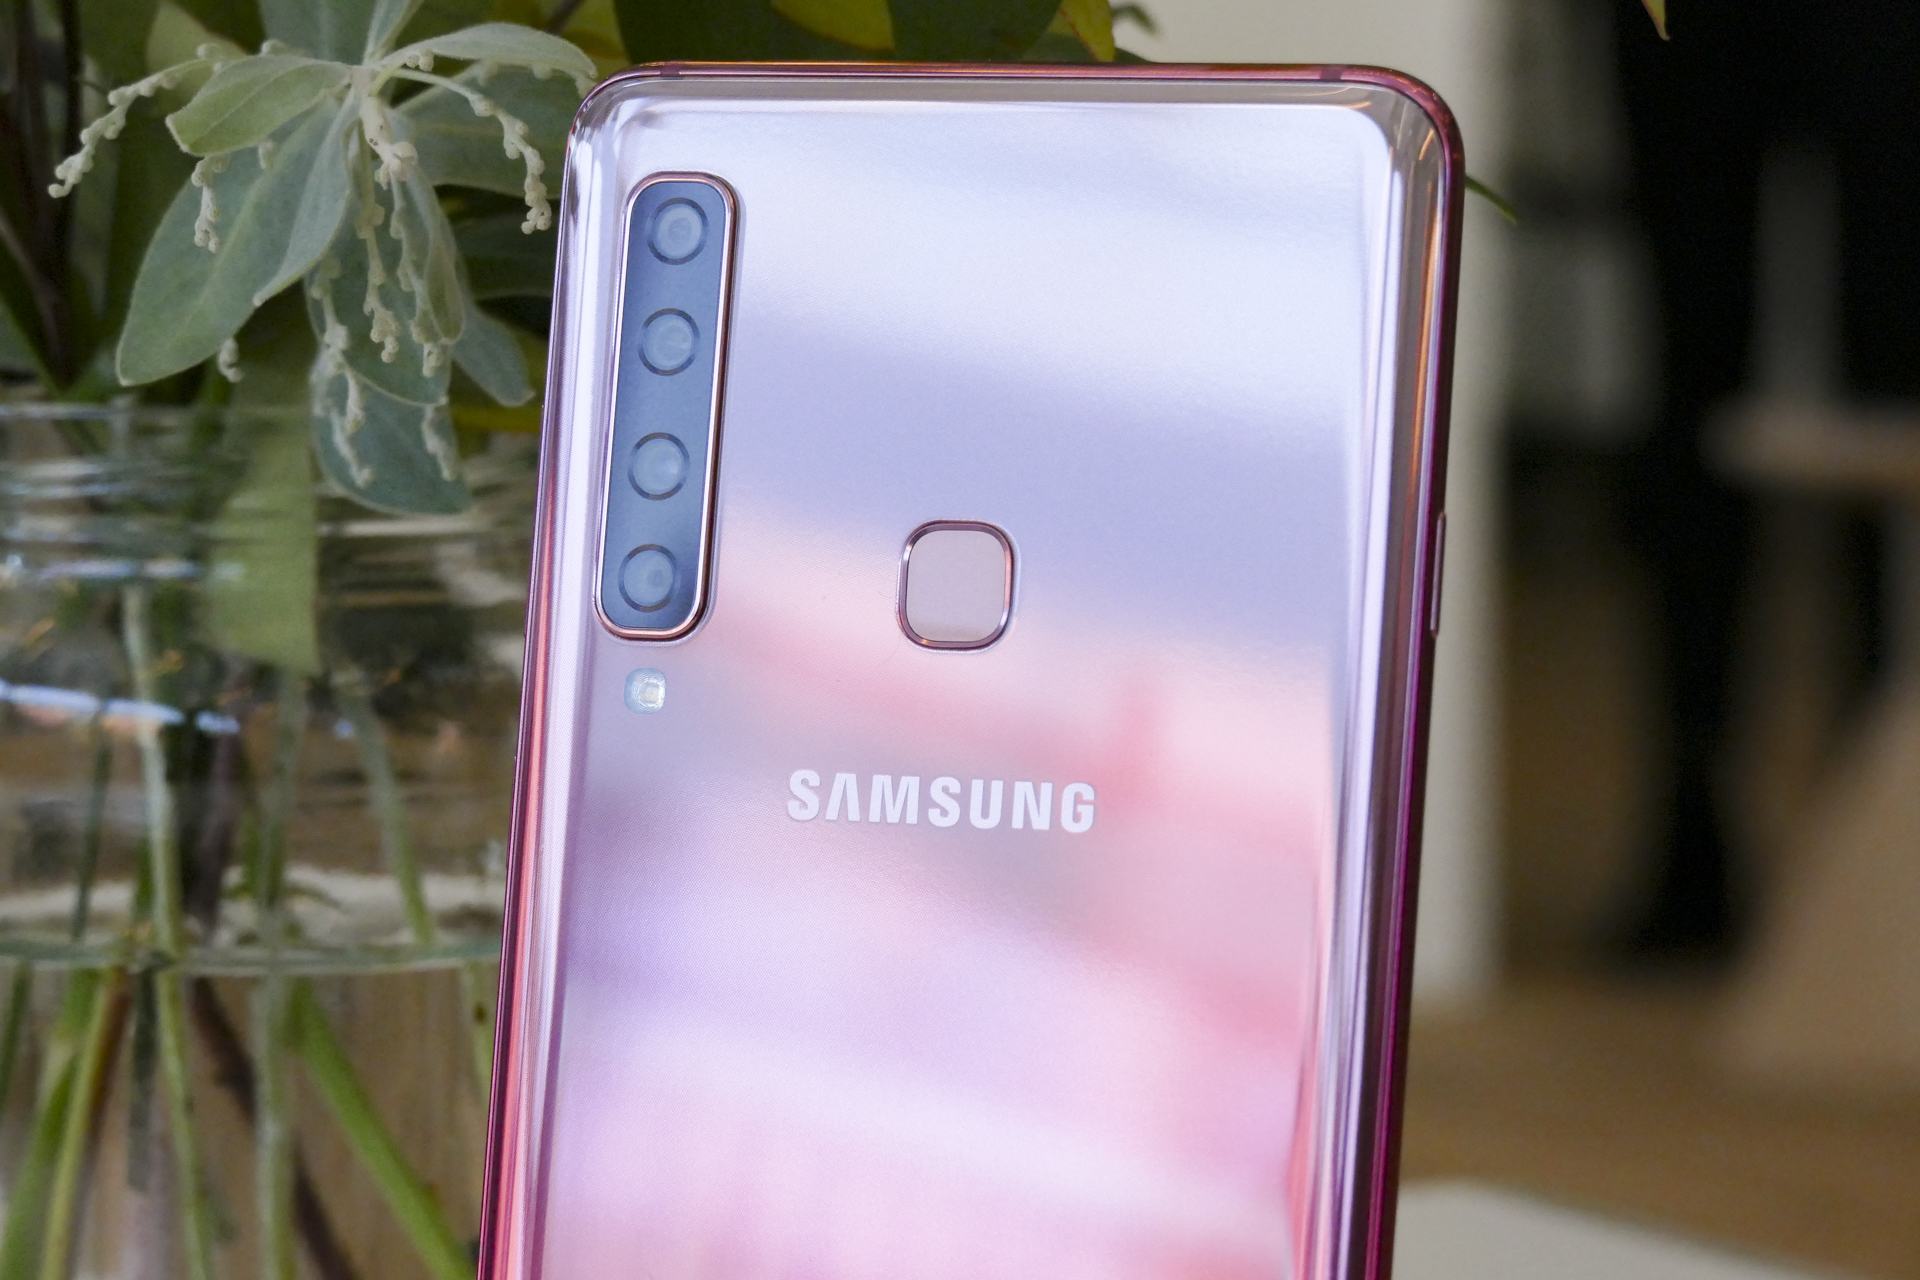 Samsung Galaxy A9 2018 Hands-on Review | Digital Trends